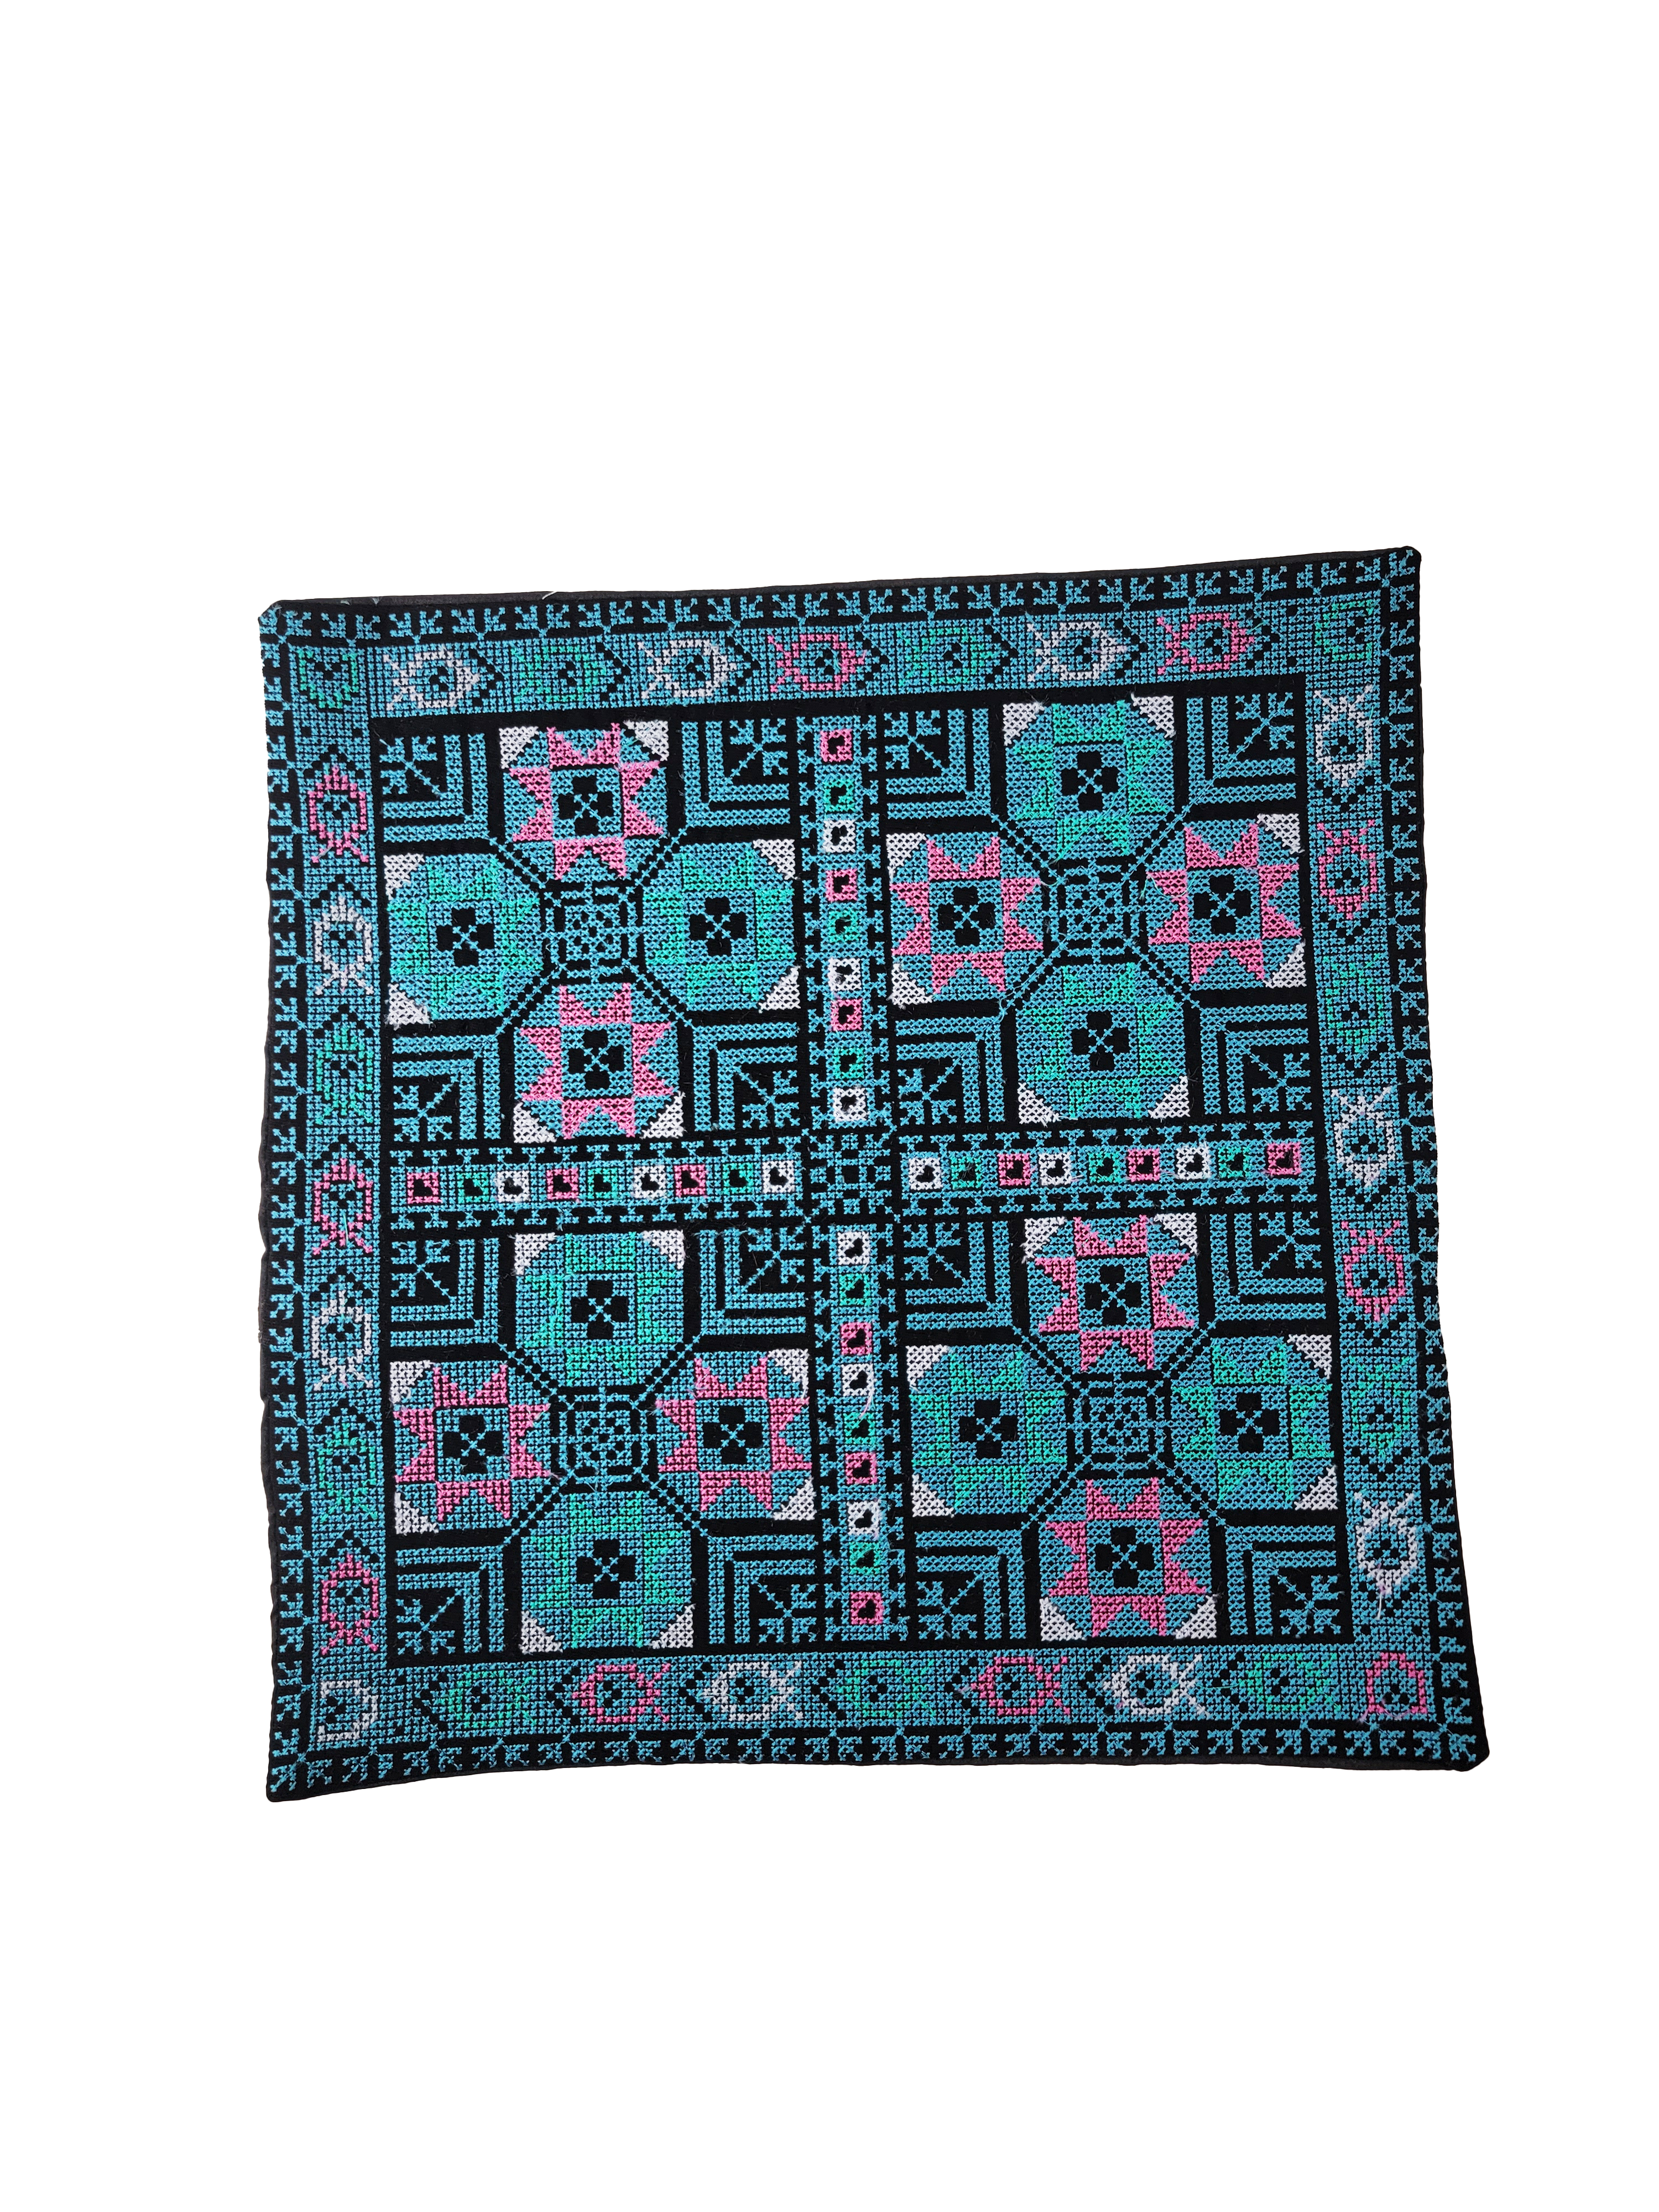 Blue Embroidered Throw Pillow - Machine Embroidered - TP13